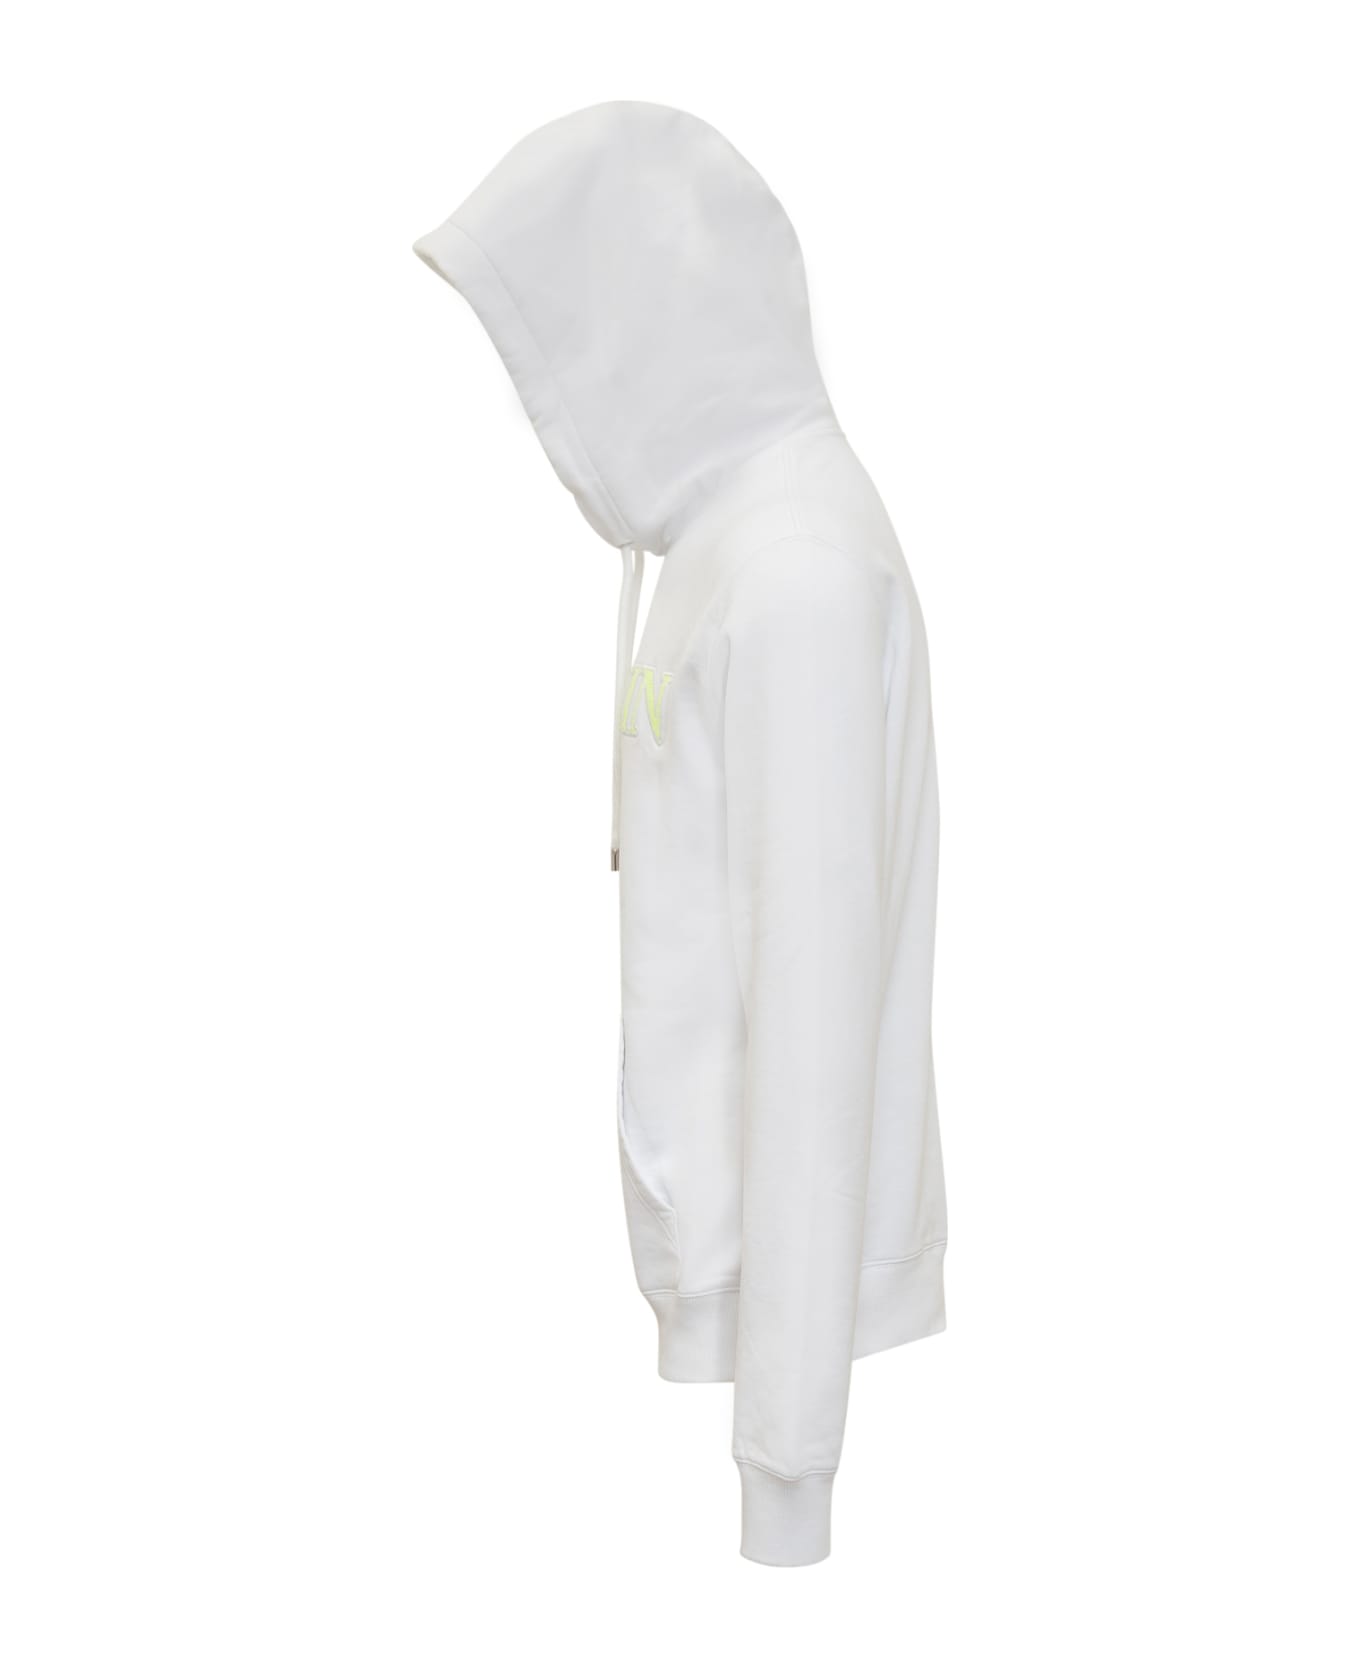 Lanvin Hoodie With Logo - OPTIC WHITE